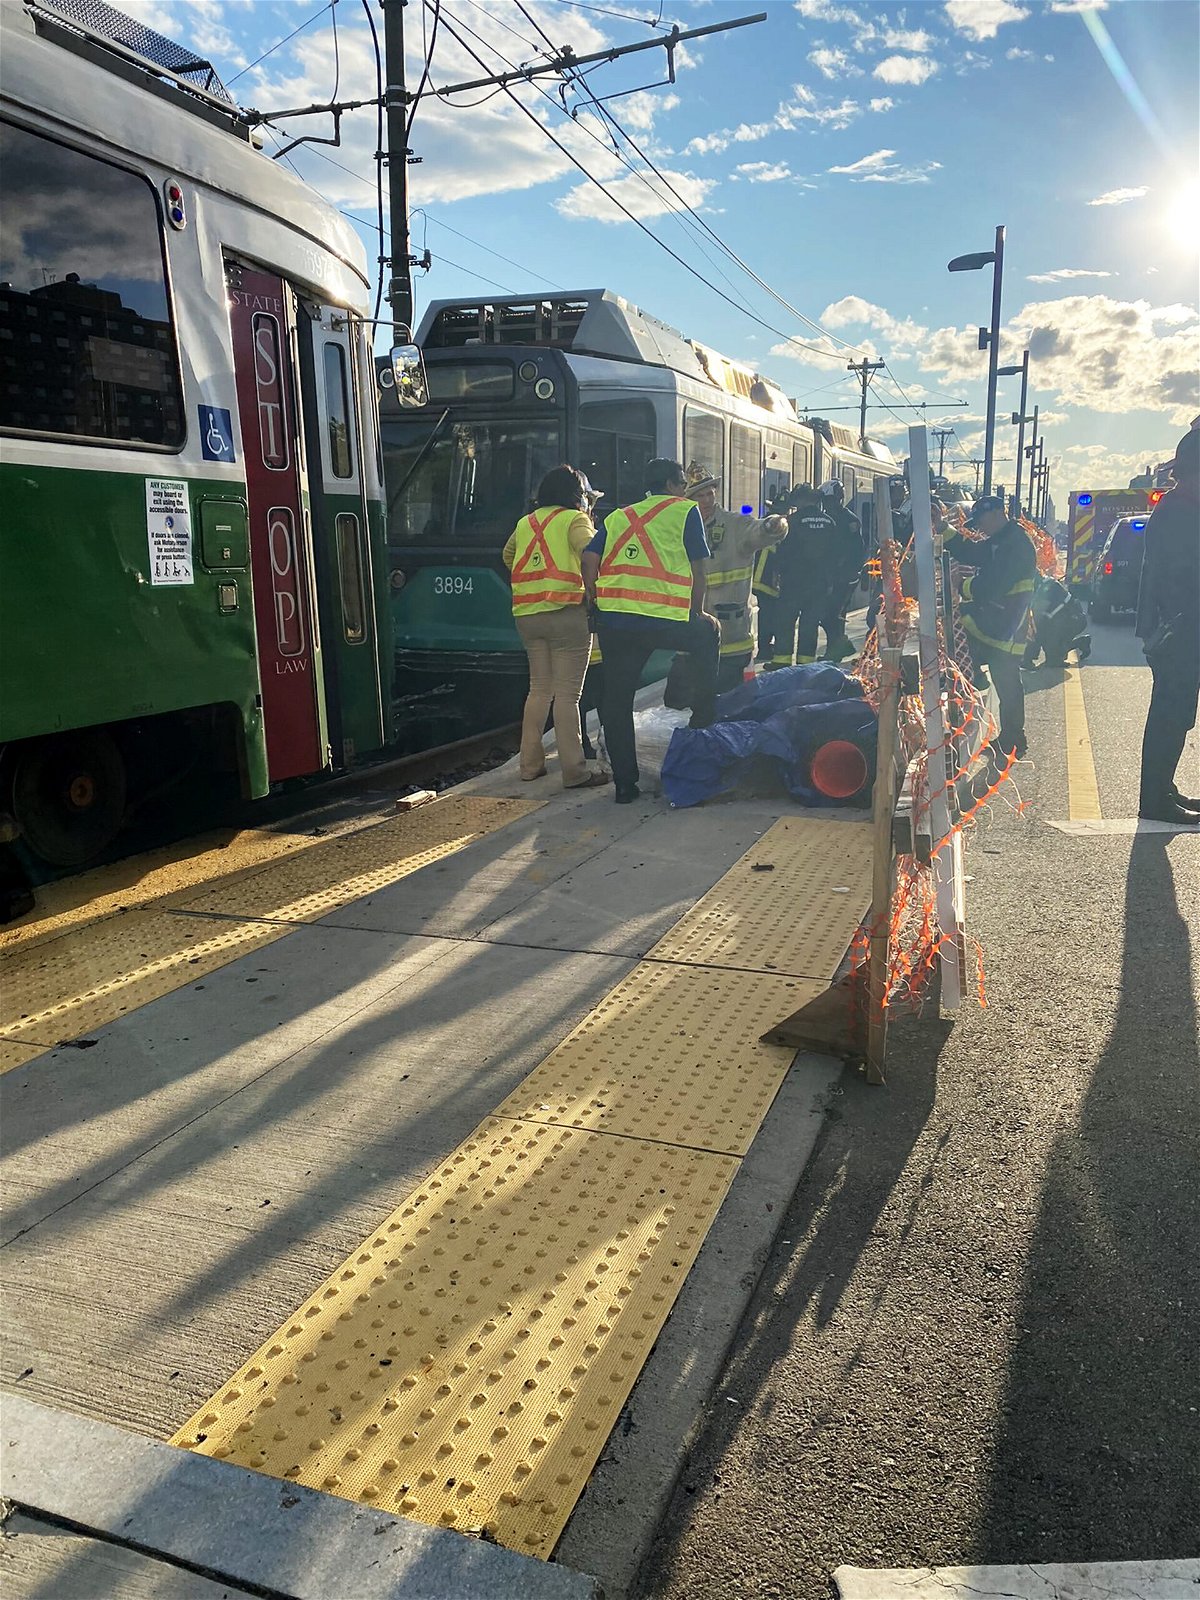 <i>Boston Fire Department</i><br/>Multiple people were reported injured after the Massachusetts Bay Transport Authority said two trains collided with one another on the Commonwealth Avenue rail line in Boston.